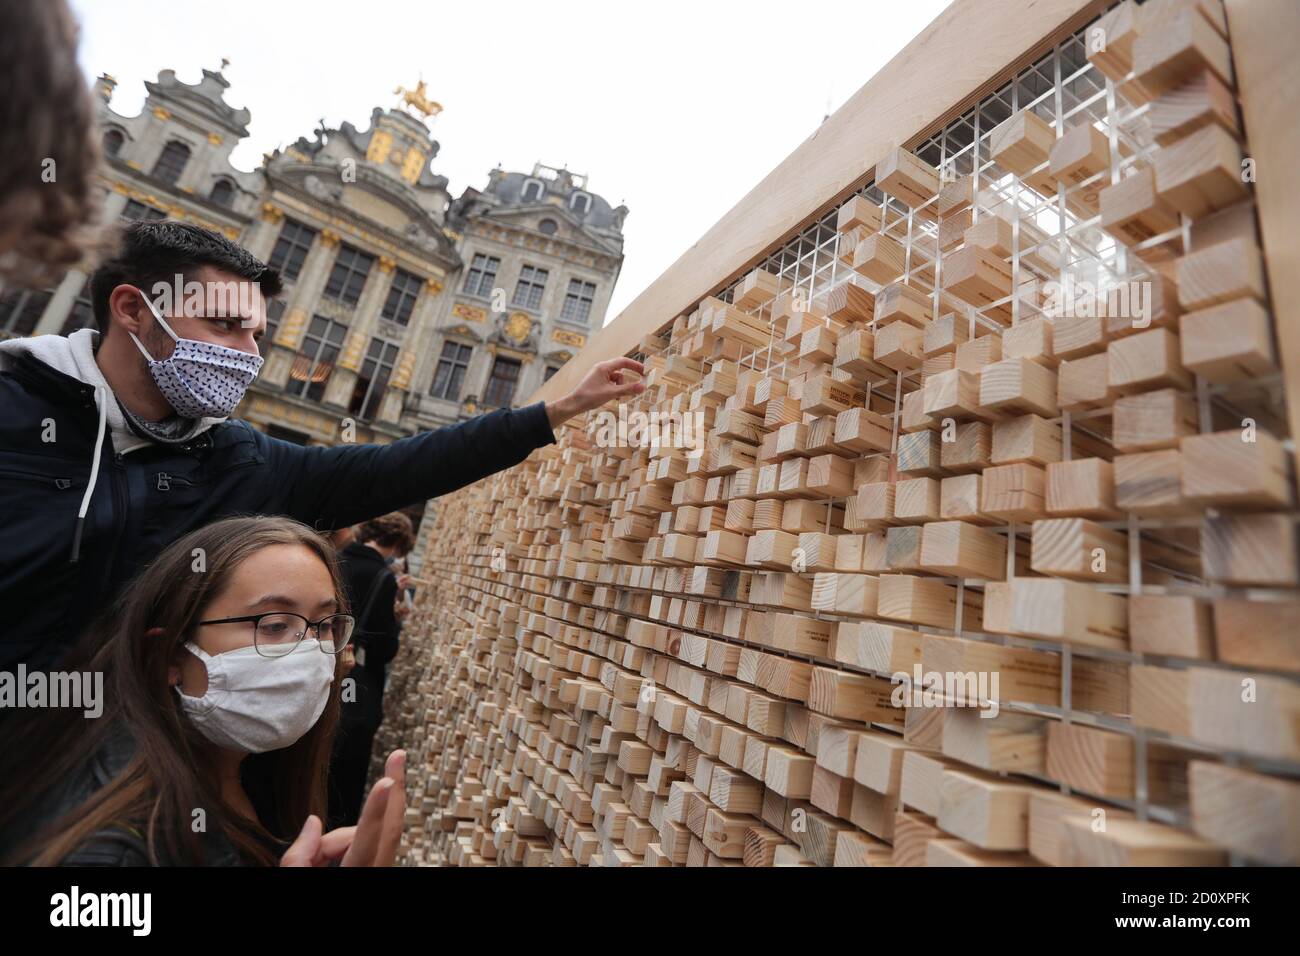 Brussels, Belgium. 3rd Oct, 2020. People take the wooden blocks from 'the Disappearing Wall' at the Grand Place, Brussels, Belgium, Oct. 3, 2020. The art installation 'the Disappearing Wall' was set up to mark the 30th anniversary of the German reunification. It consists of 6,000 wooden blocks with quotes of worldwide artists and thinkers. After passers-by take away the wooden blocks with quotes, the installation will be left with an translucent frame, showing the concept 'the wall will disappear'. Credit: Zheng Huansong/Xinhua/Alamy Live News Stock Photo